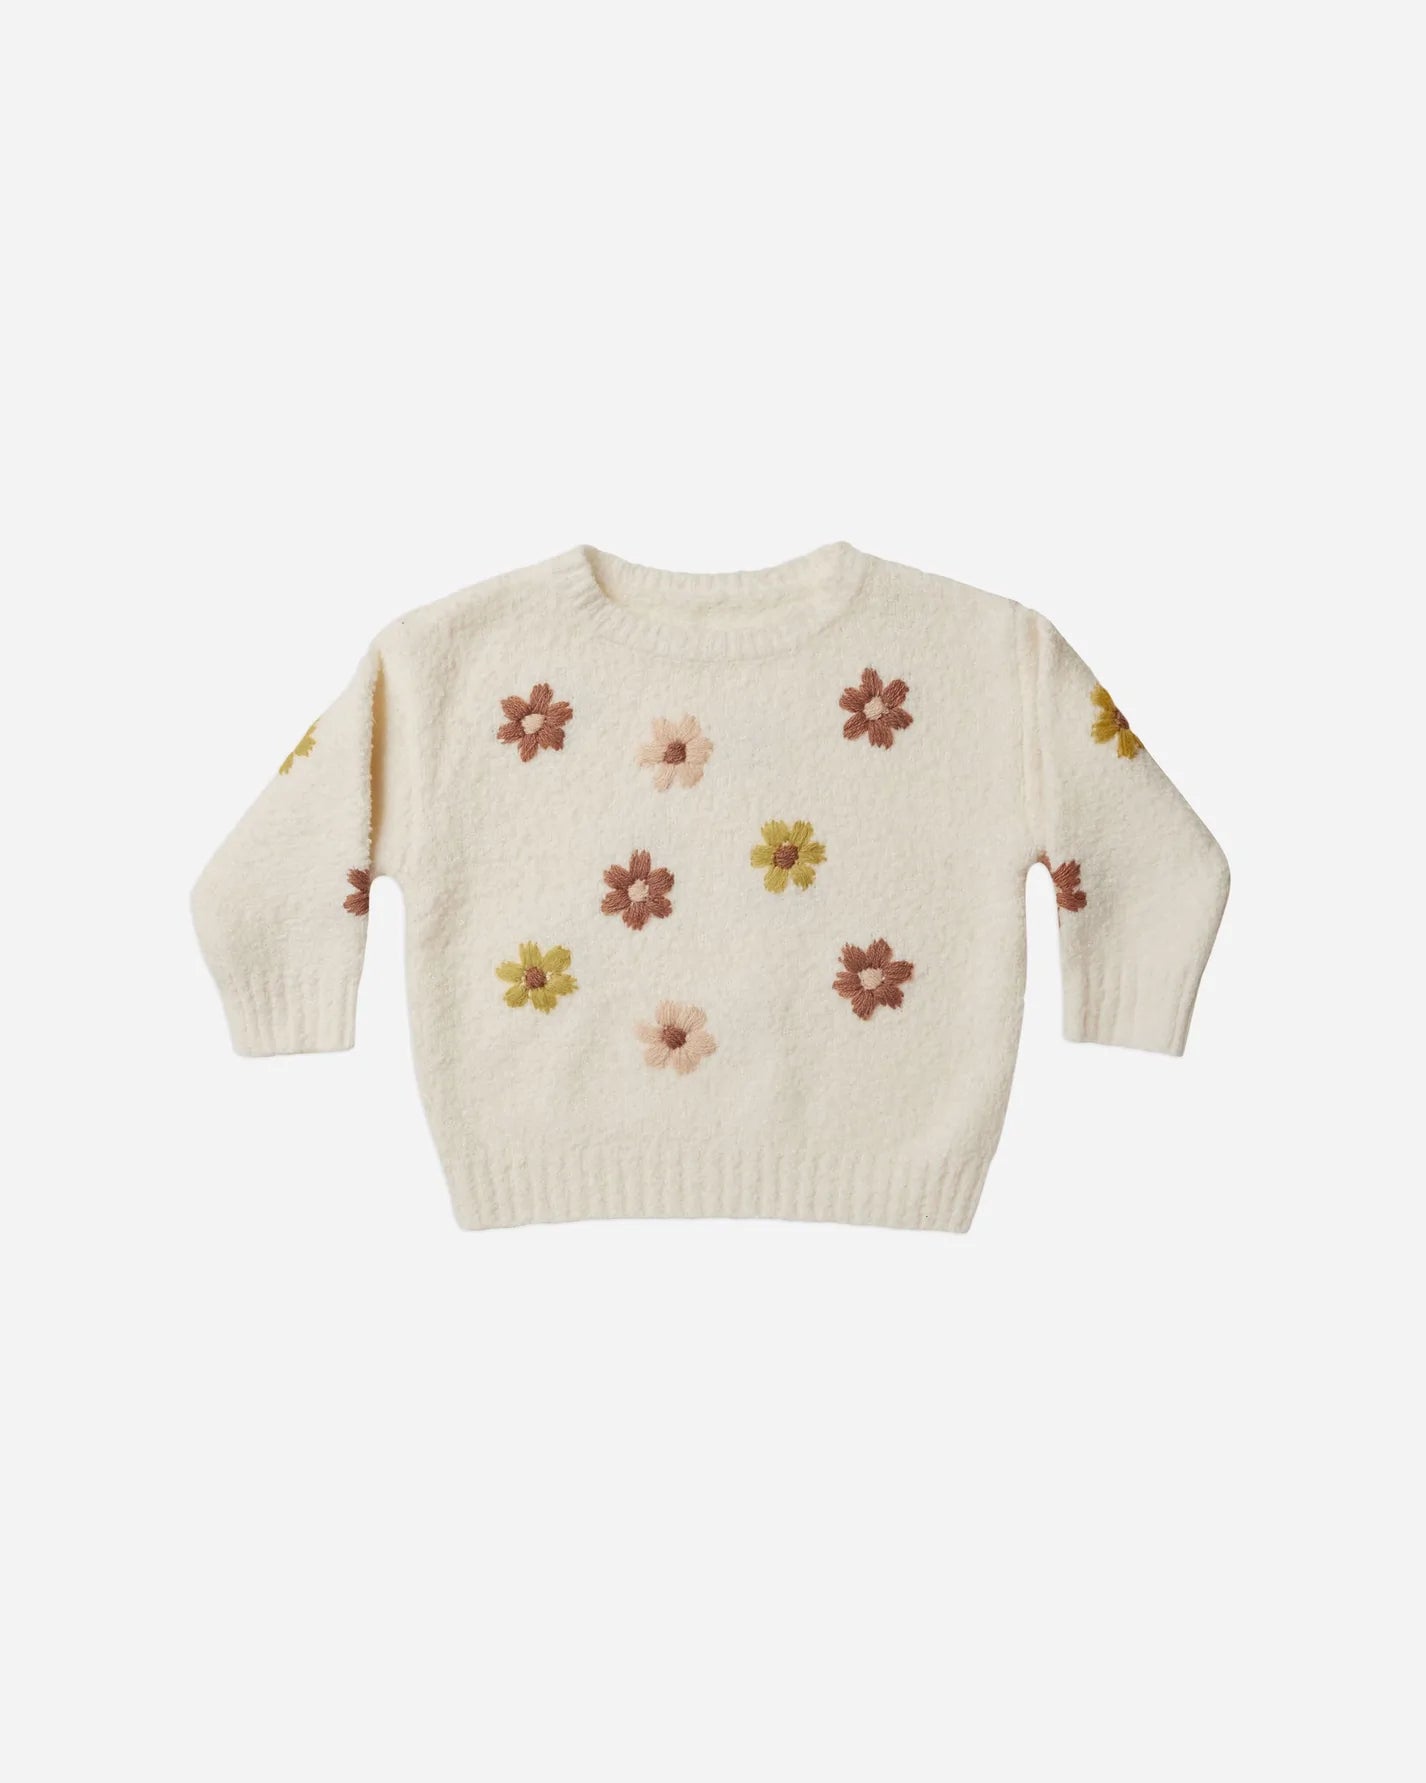 Cassidy Sweater in Flowers 6-12 months - Doodlebug's Children's Boutique